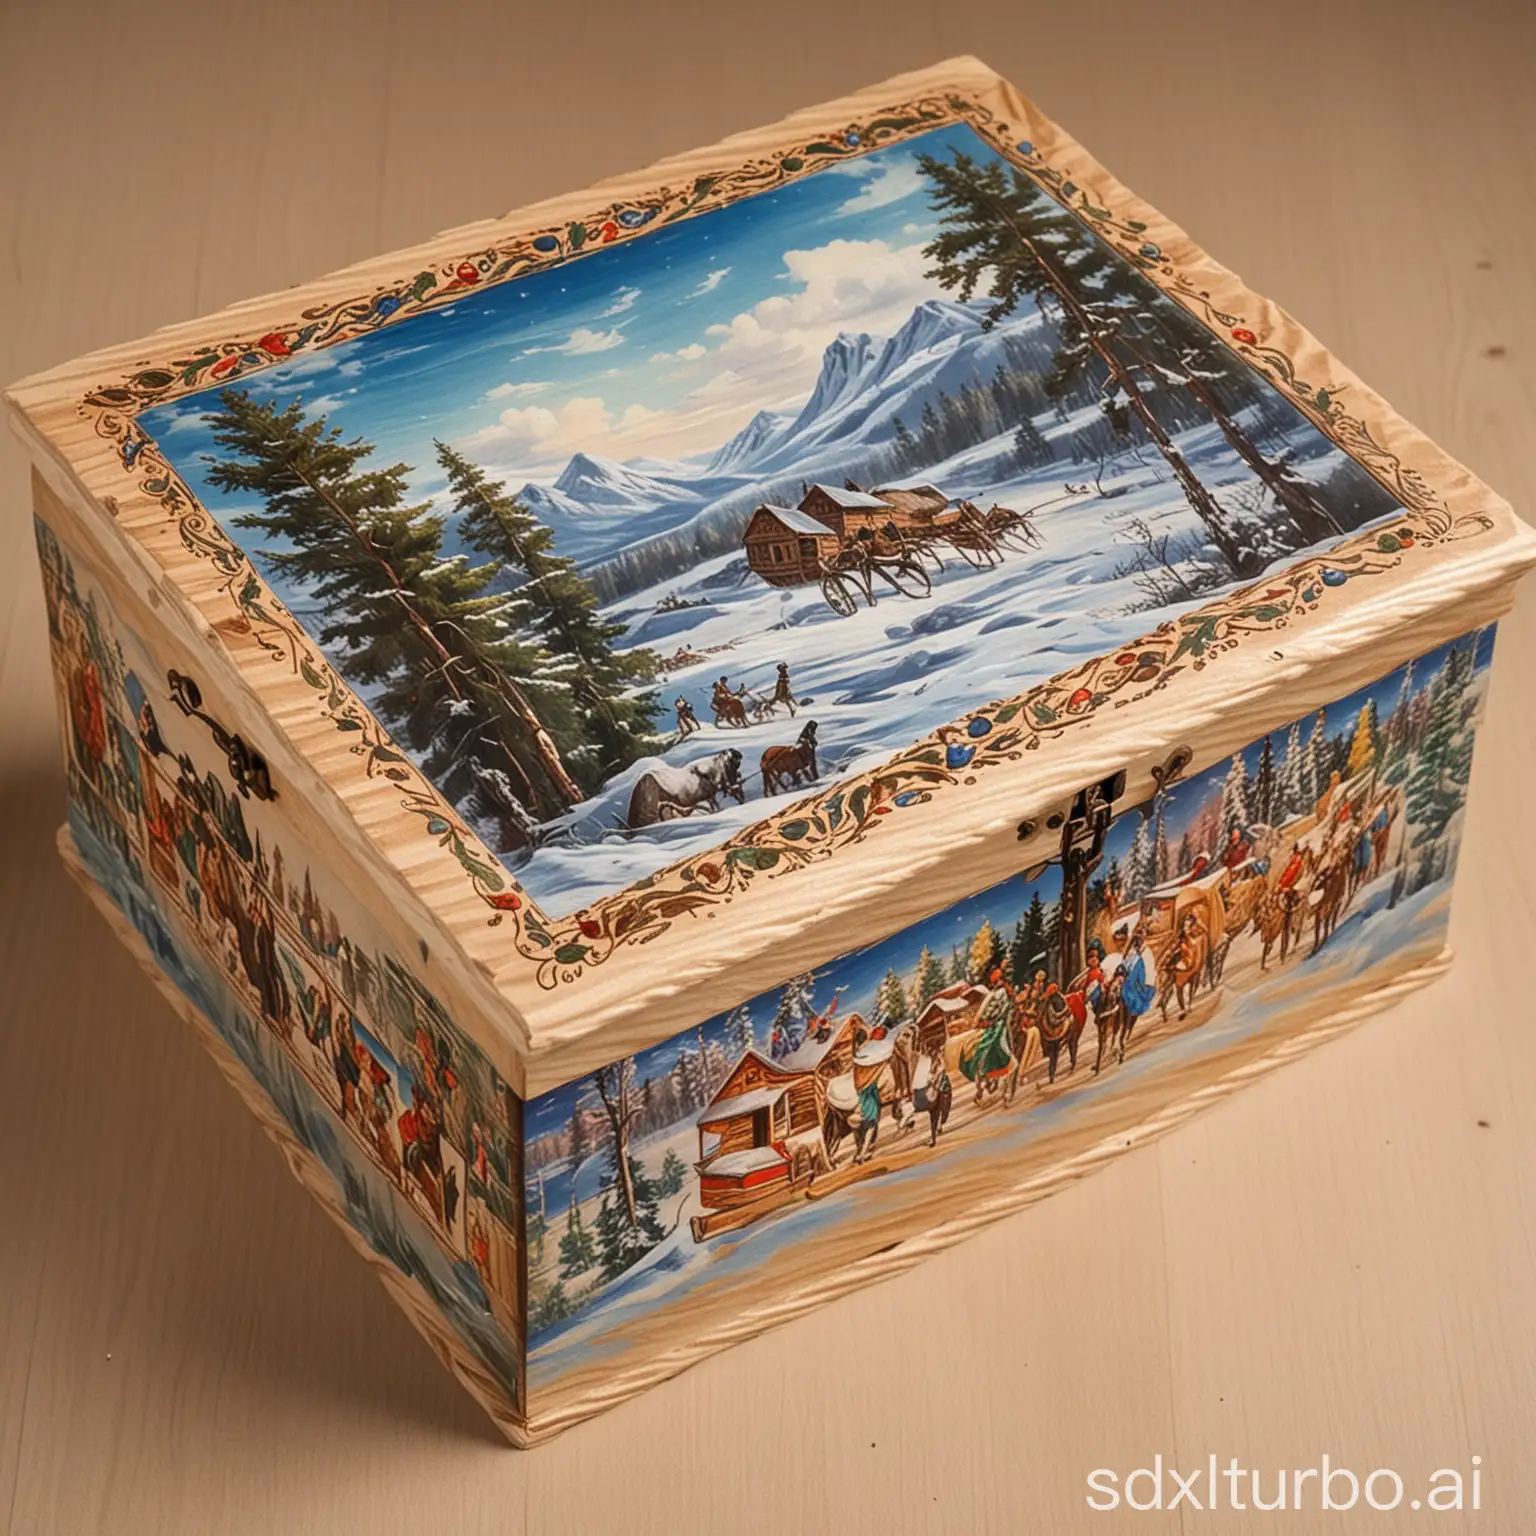 wooden box made from plywood, which was painted by people with FAS in manual theme of Siberia, will be sold in souvenir shop